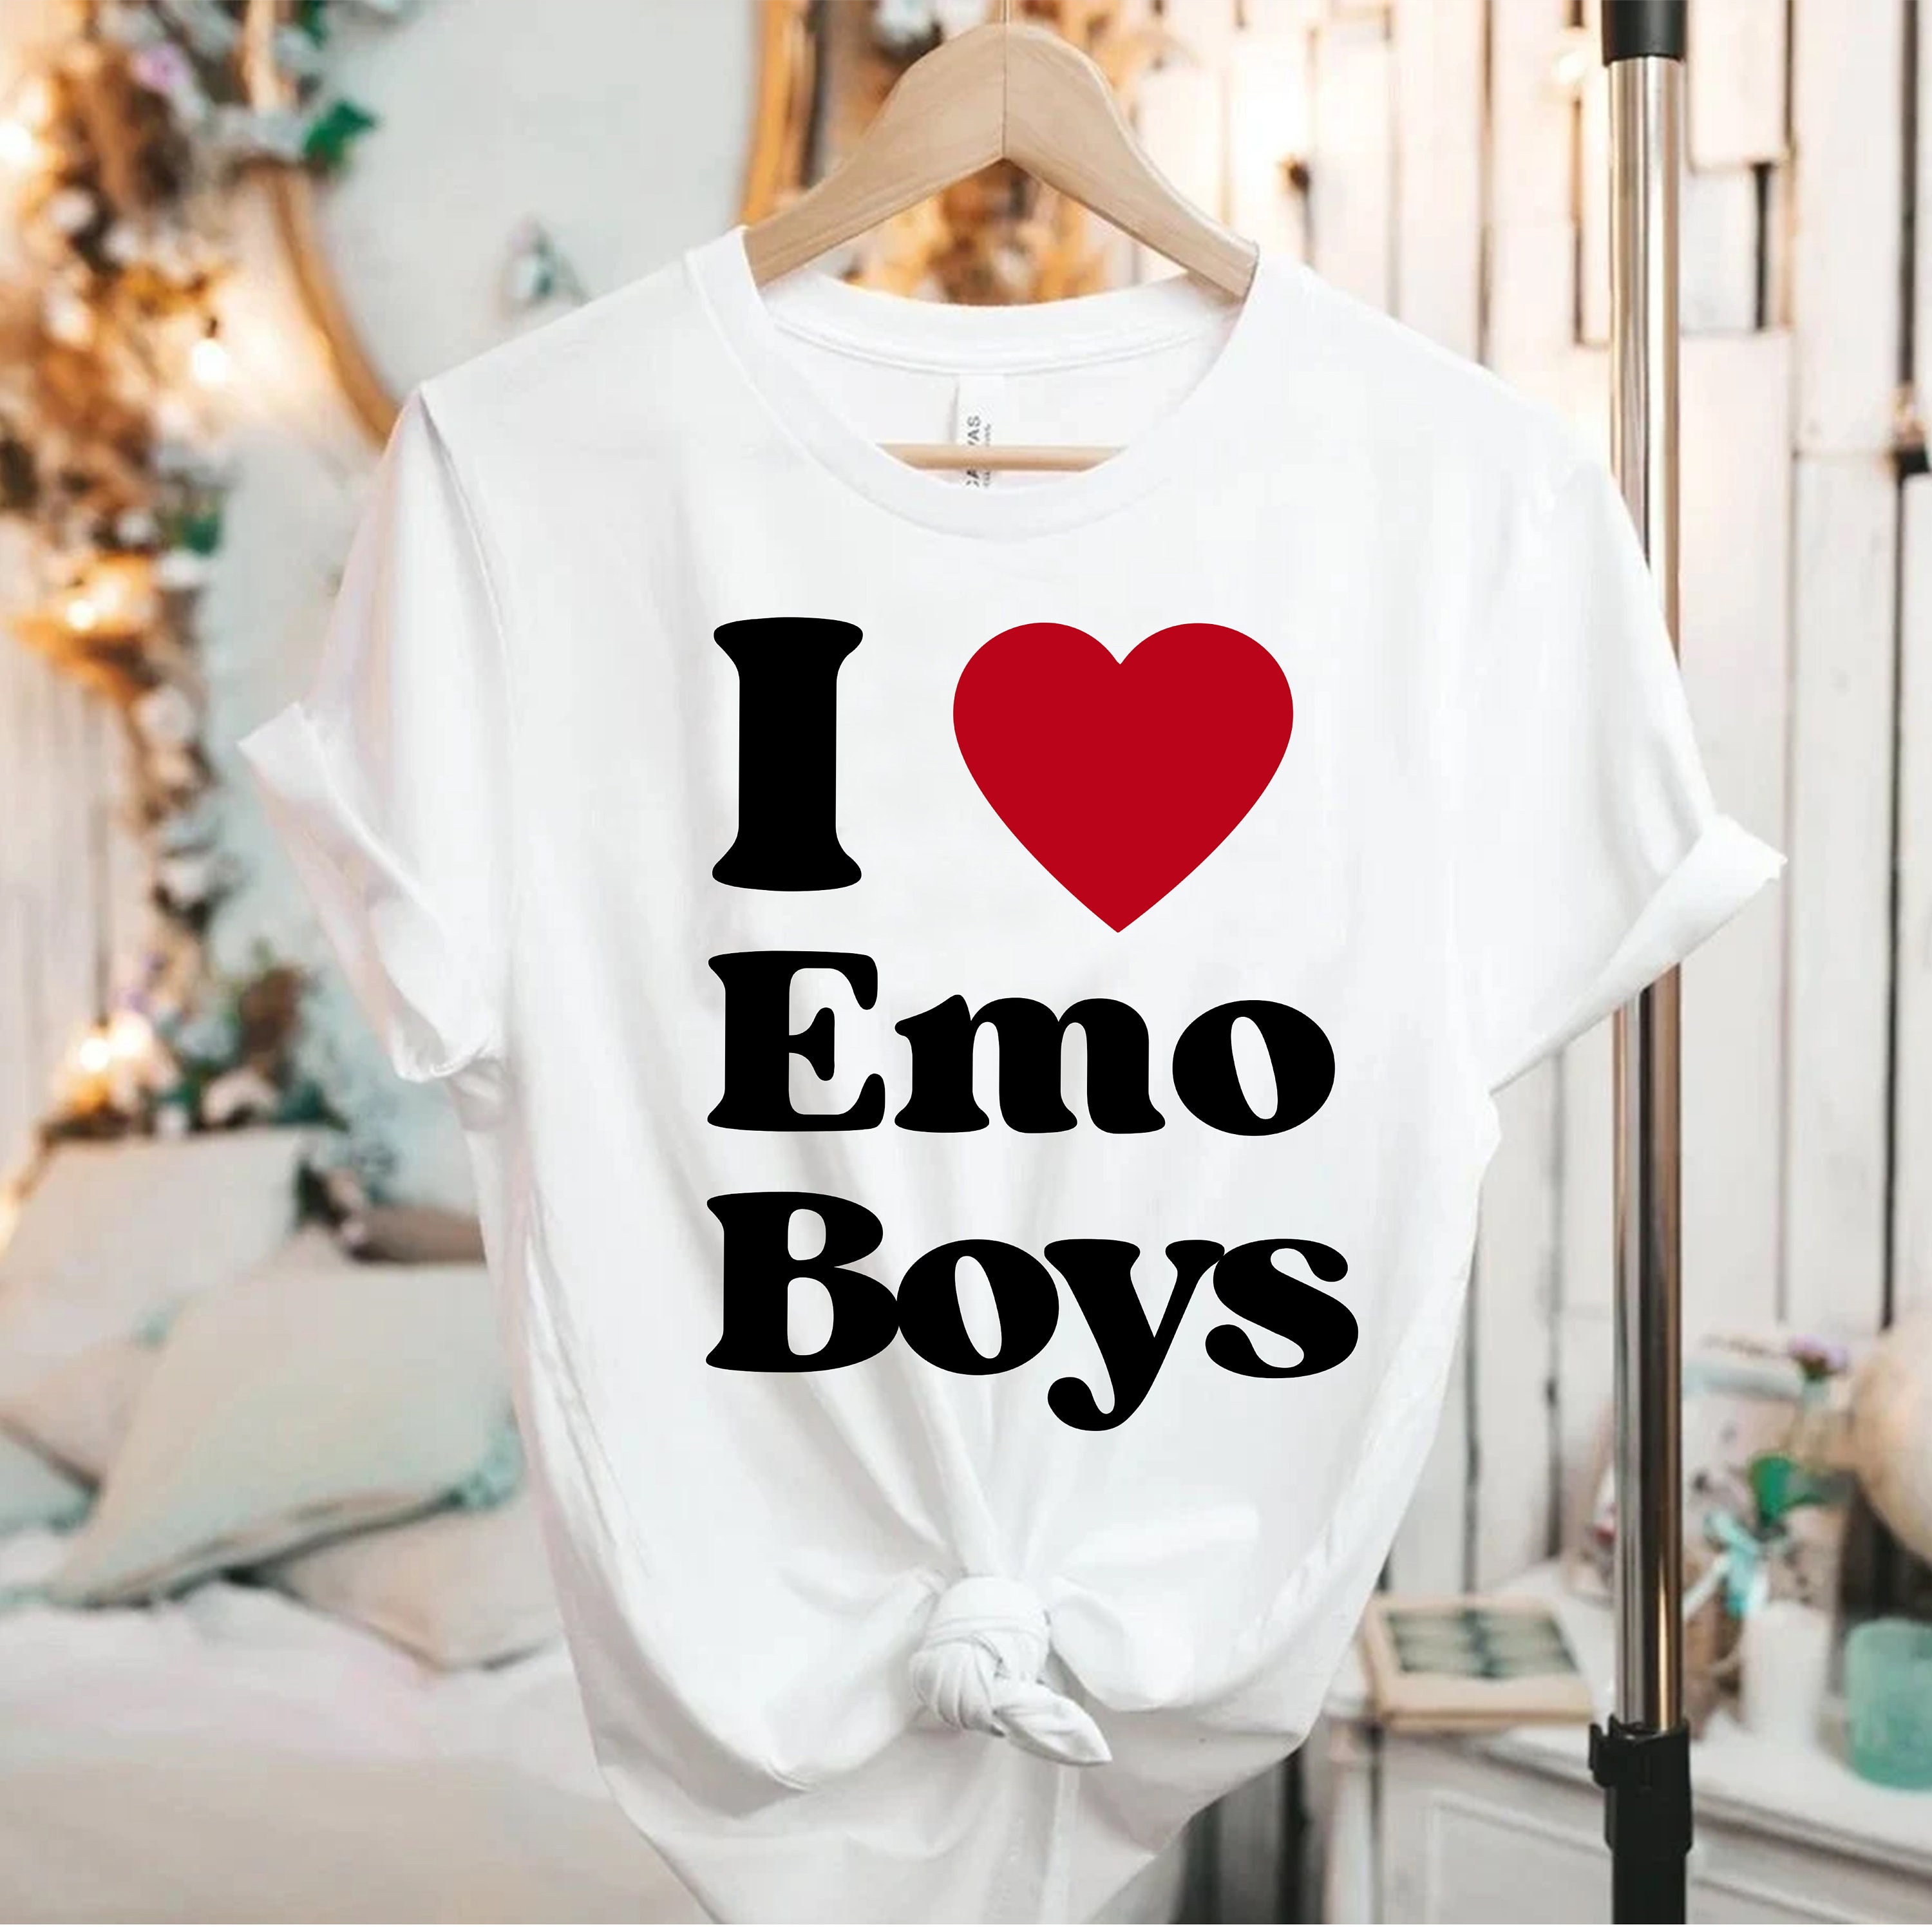 Create comics meme t-shirts for roblox for emo girls, for the t